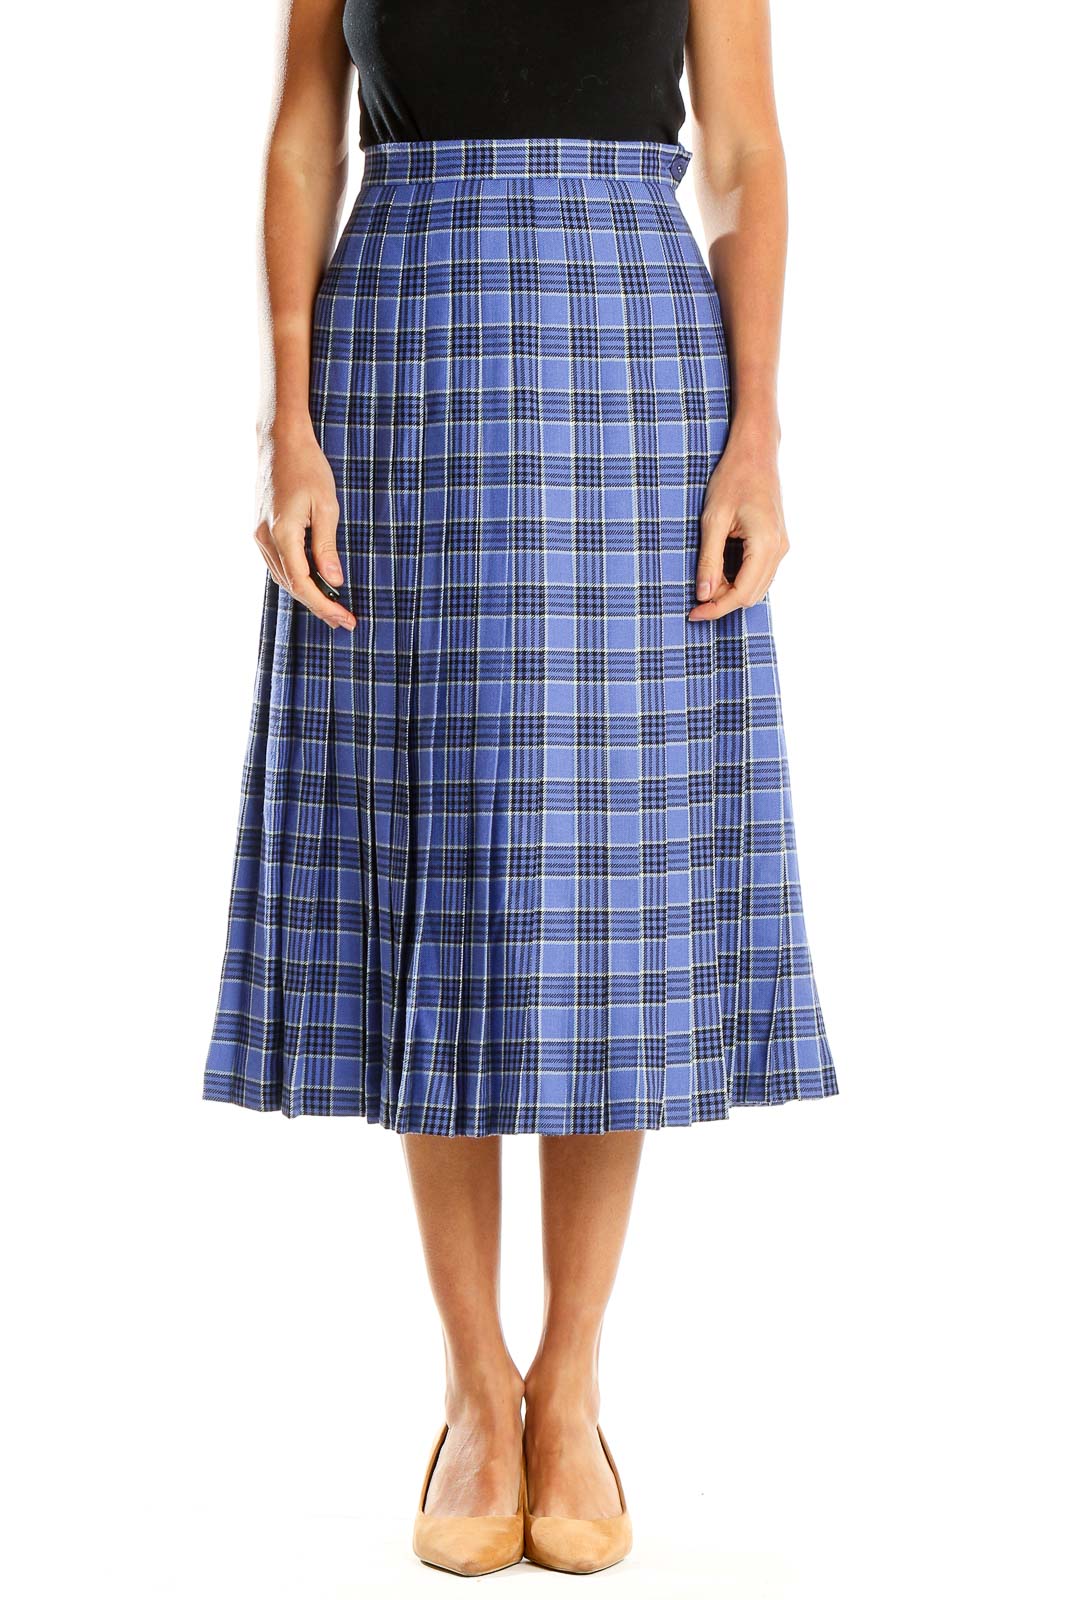 Purple Checkered Pleated A-Line Skirt Front